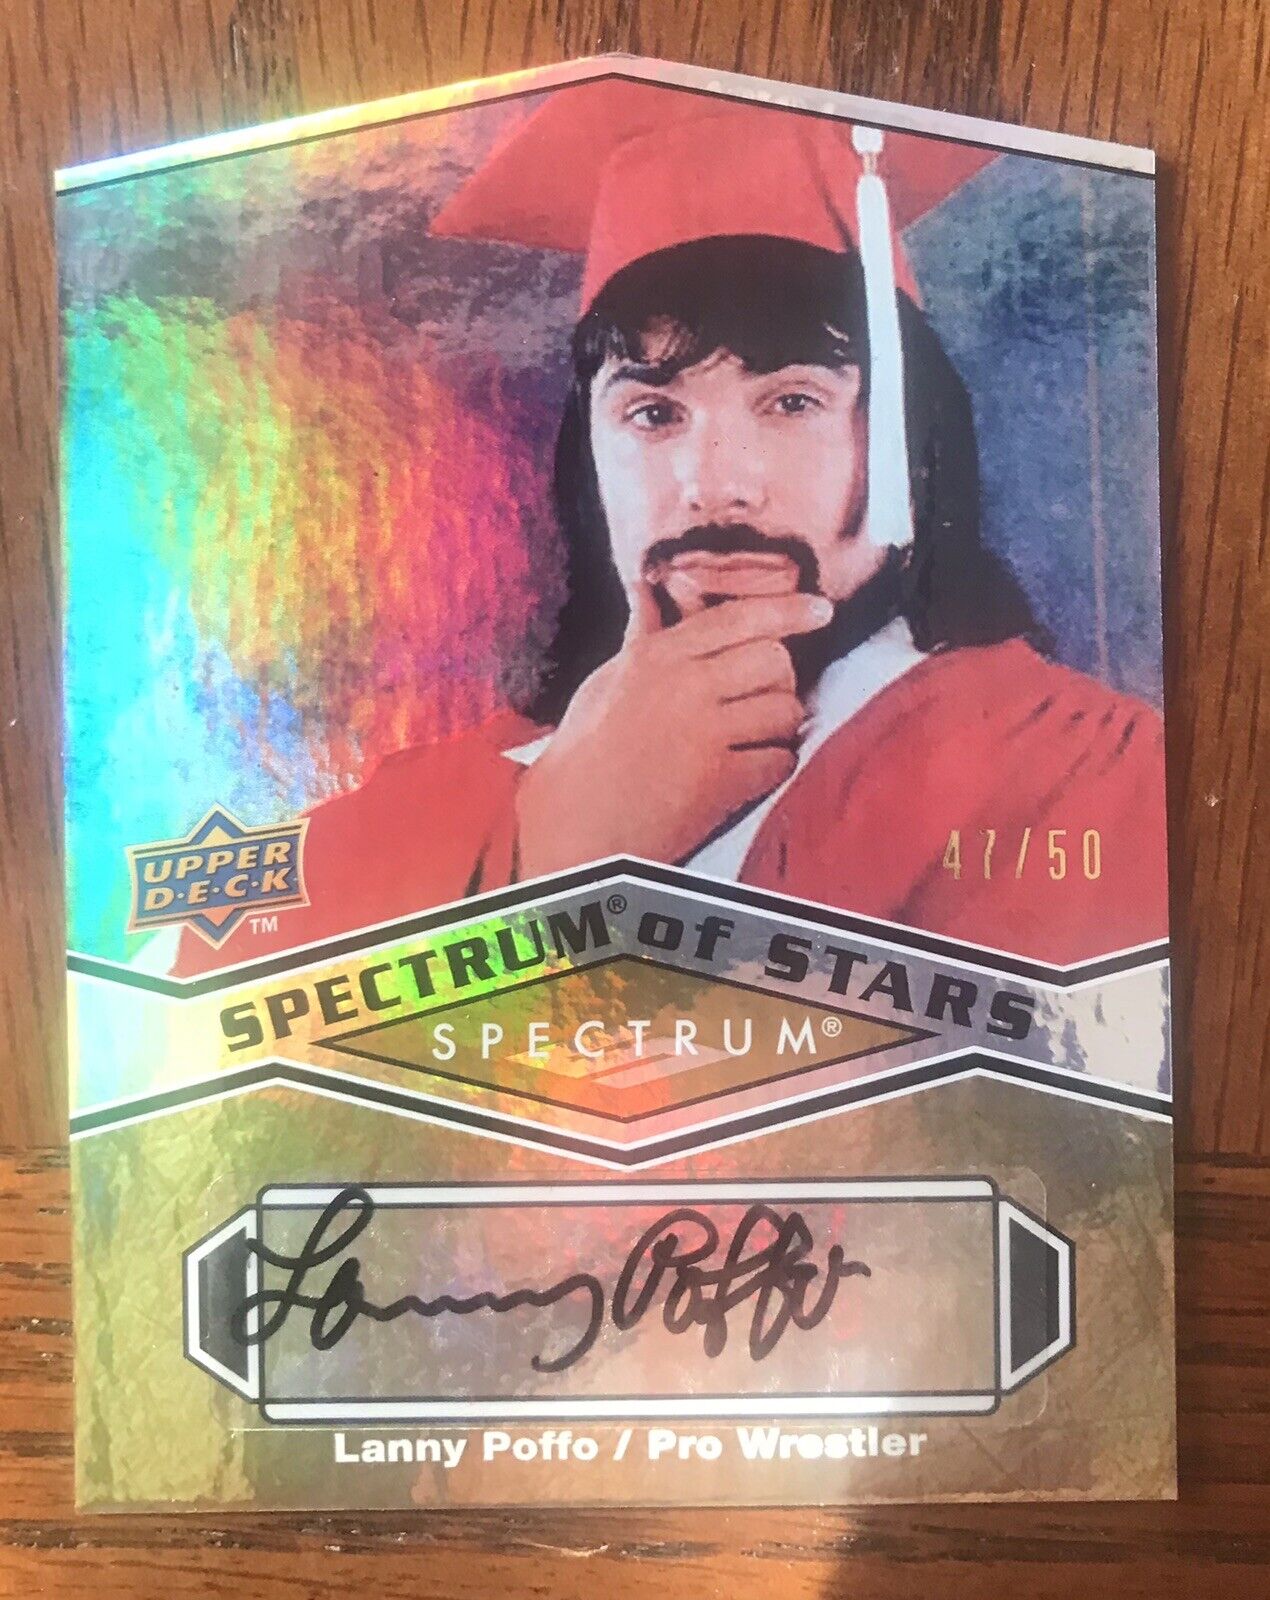 Leaping LANNY POFFO 2009 UPPER DECK Spectrum Of STARS Autograph  47/50  WWF